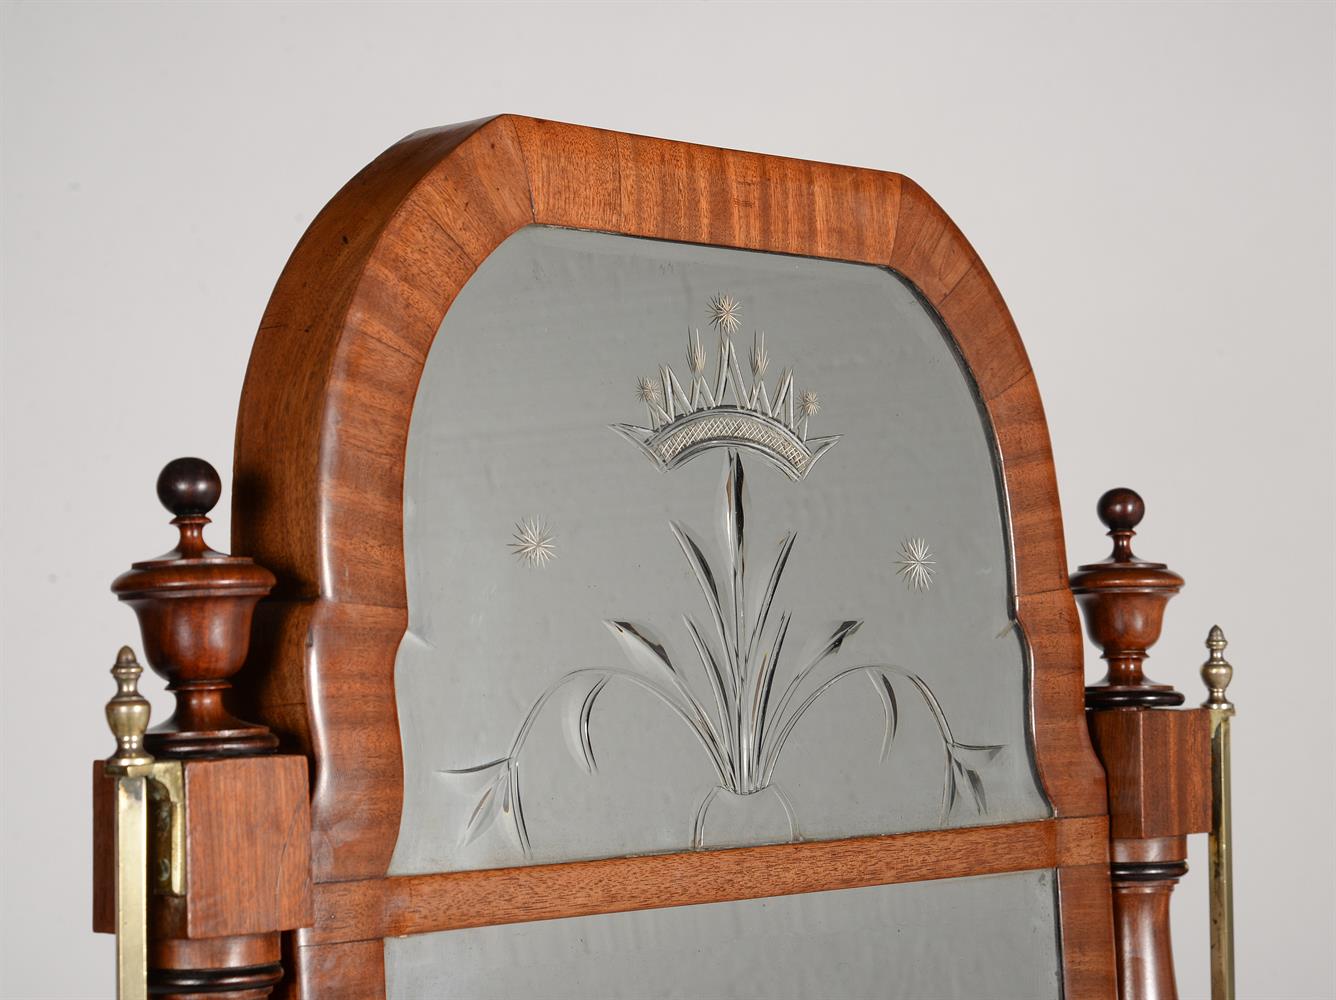 A REGENCY MAHOGANY AND EBONISED CHEVAL MIRROR, IN THE MANNER OF GILLOWS, CIRCA 1815 - Image 3 of 5